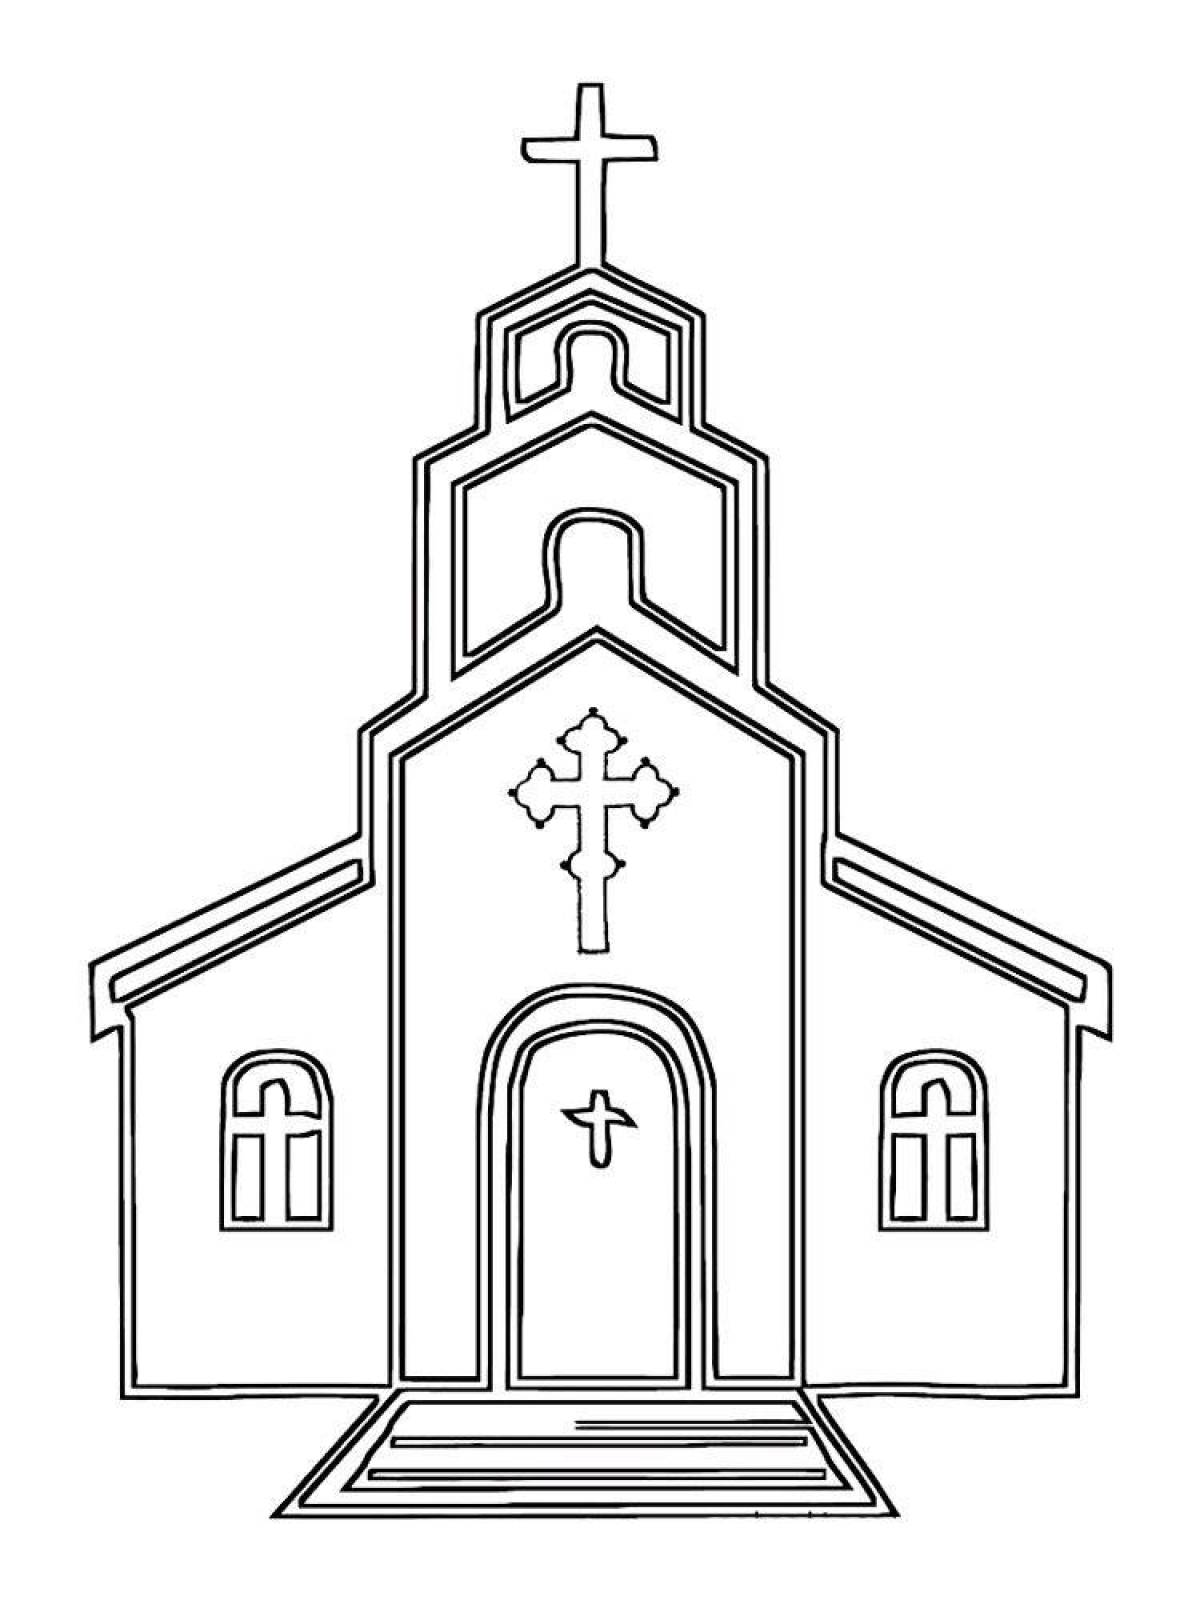 Decorated church coloring page